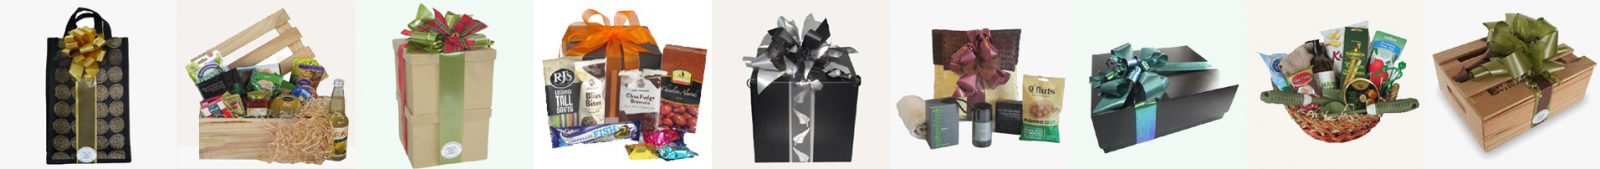 Gift Baskets & Boxes Auckland & NZ Wide Shipping